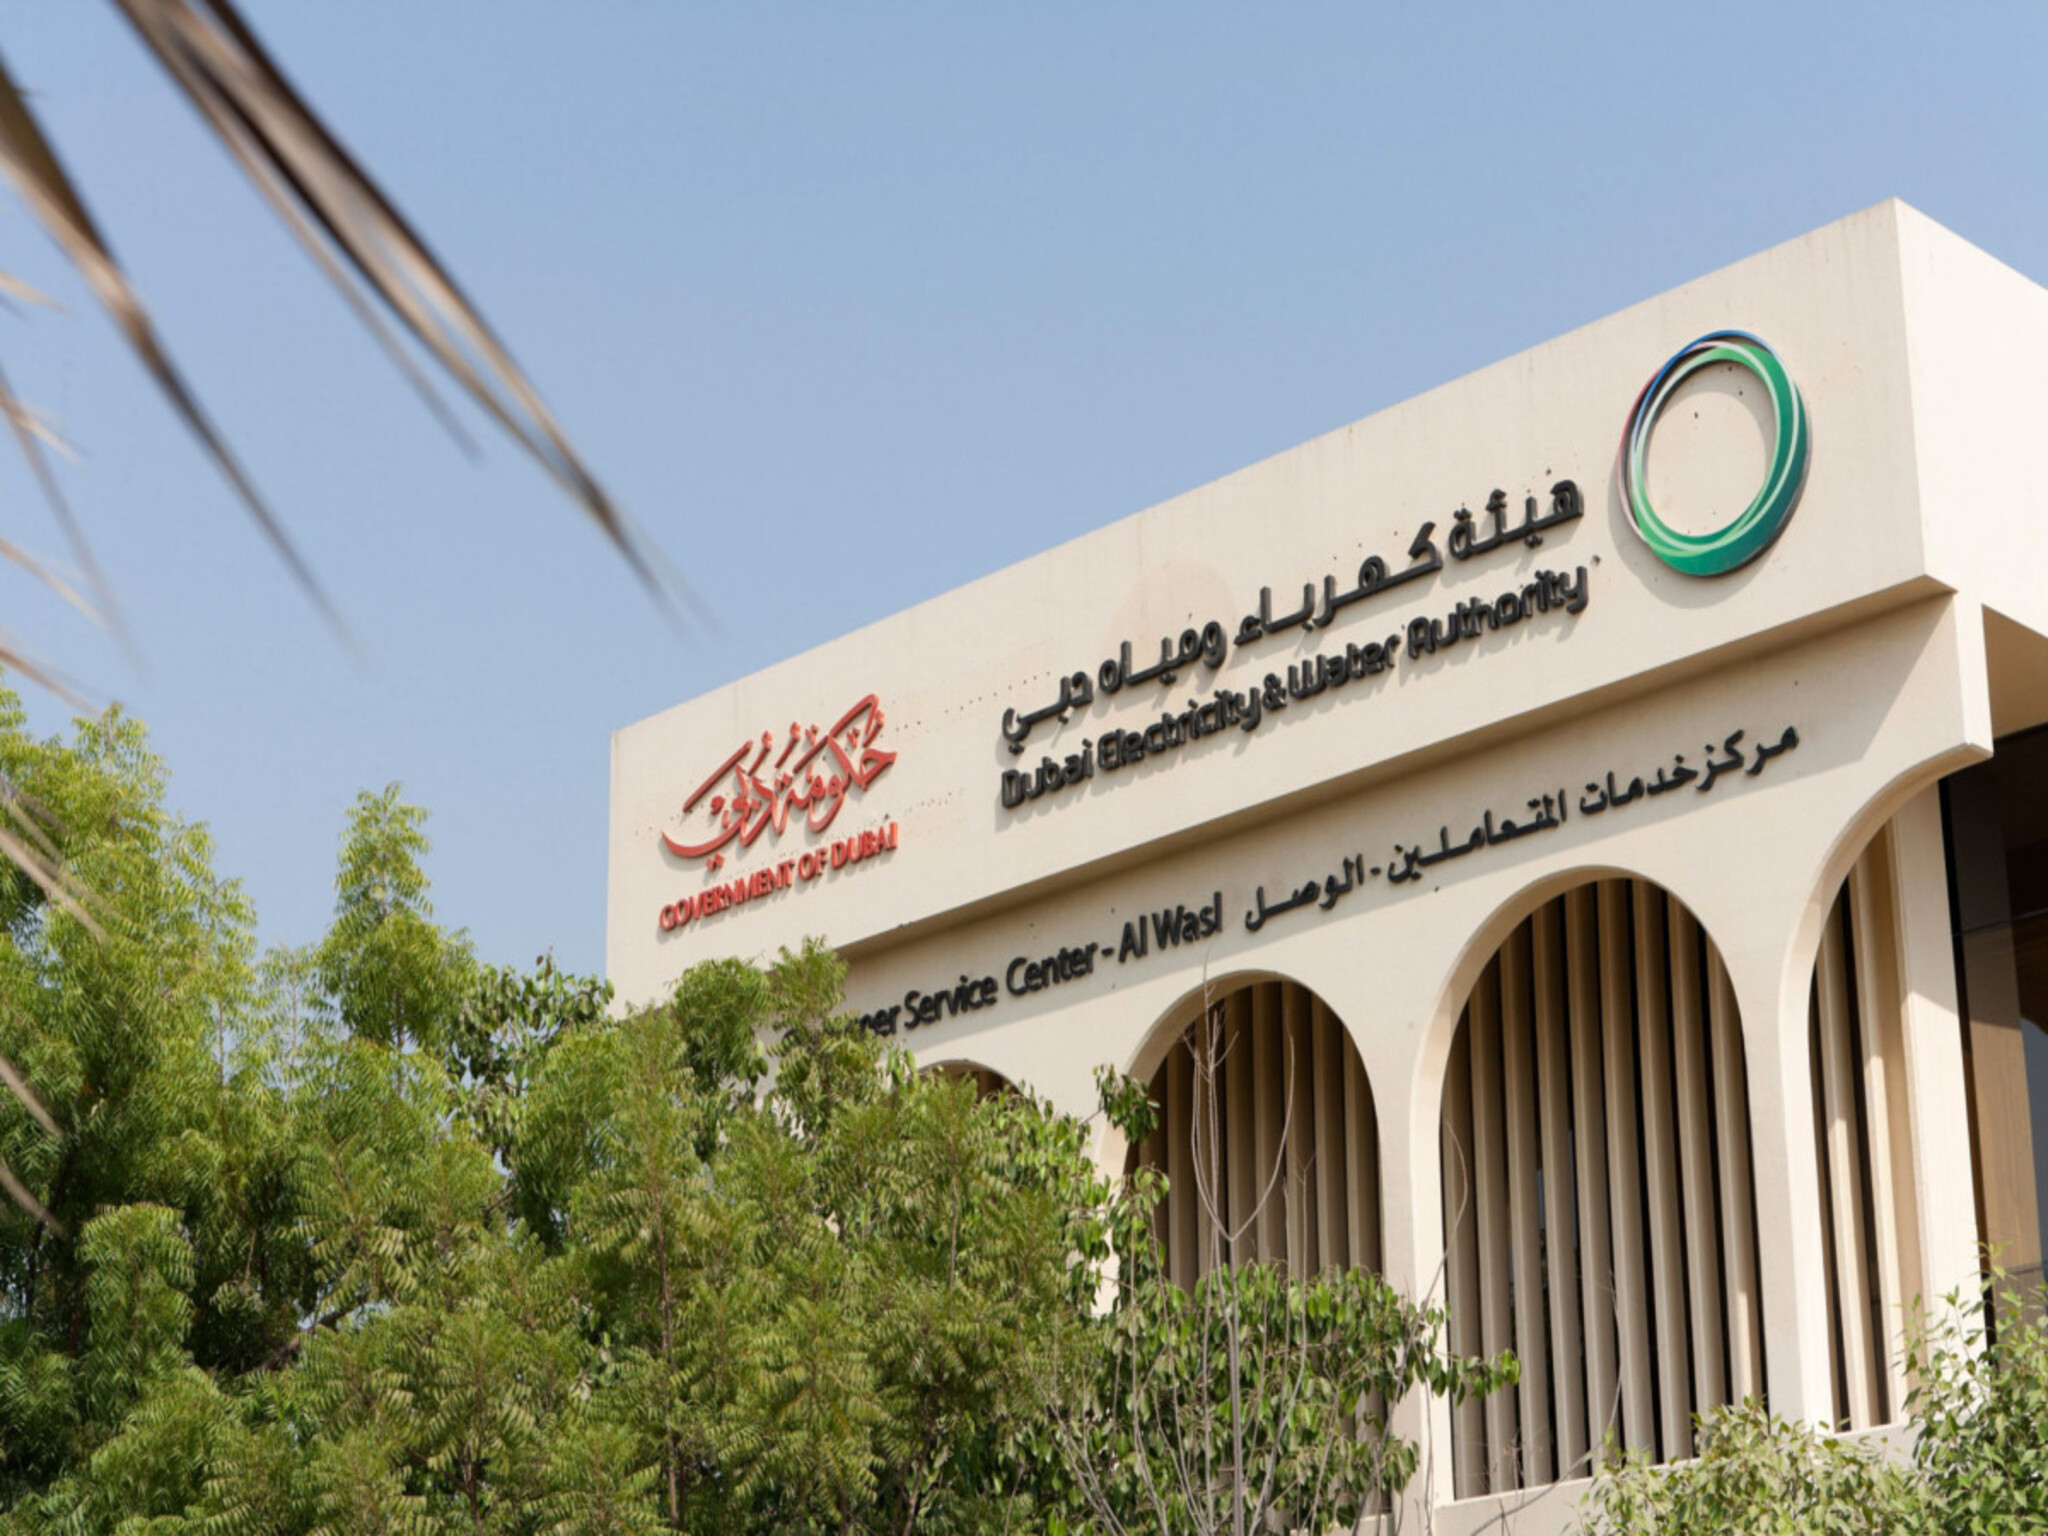 Dubai Electricity Authority launches the “Smart Response” service on its website